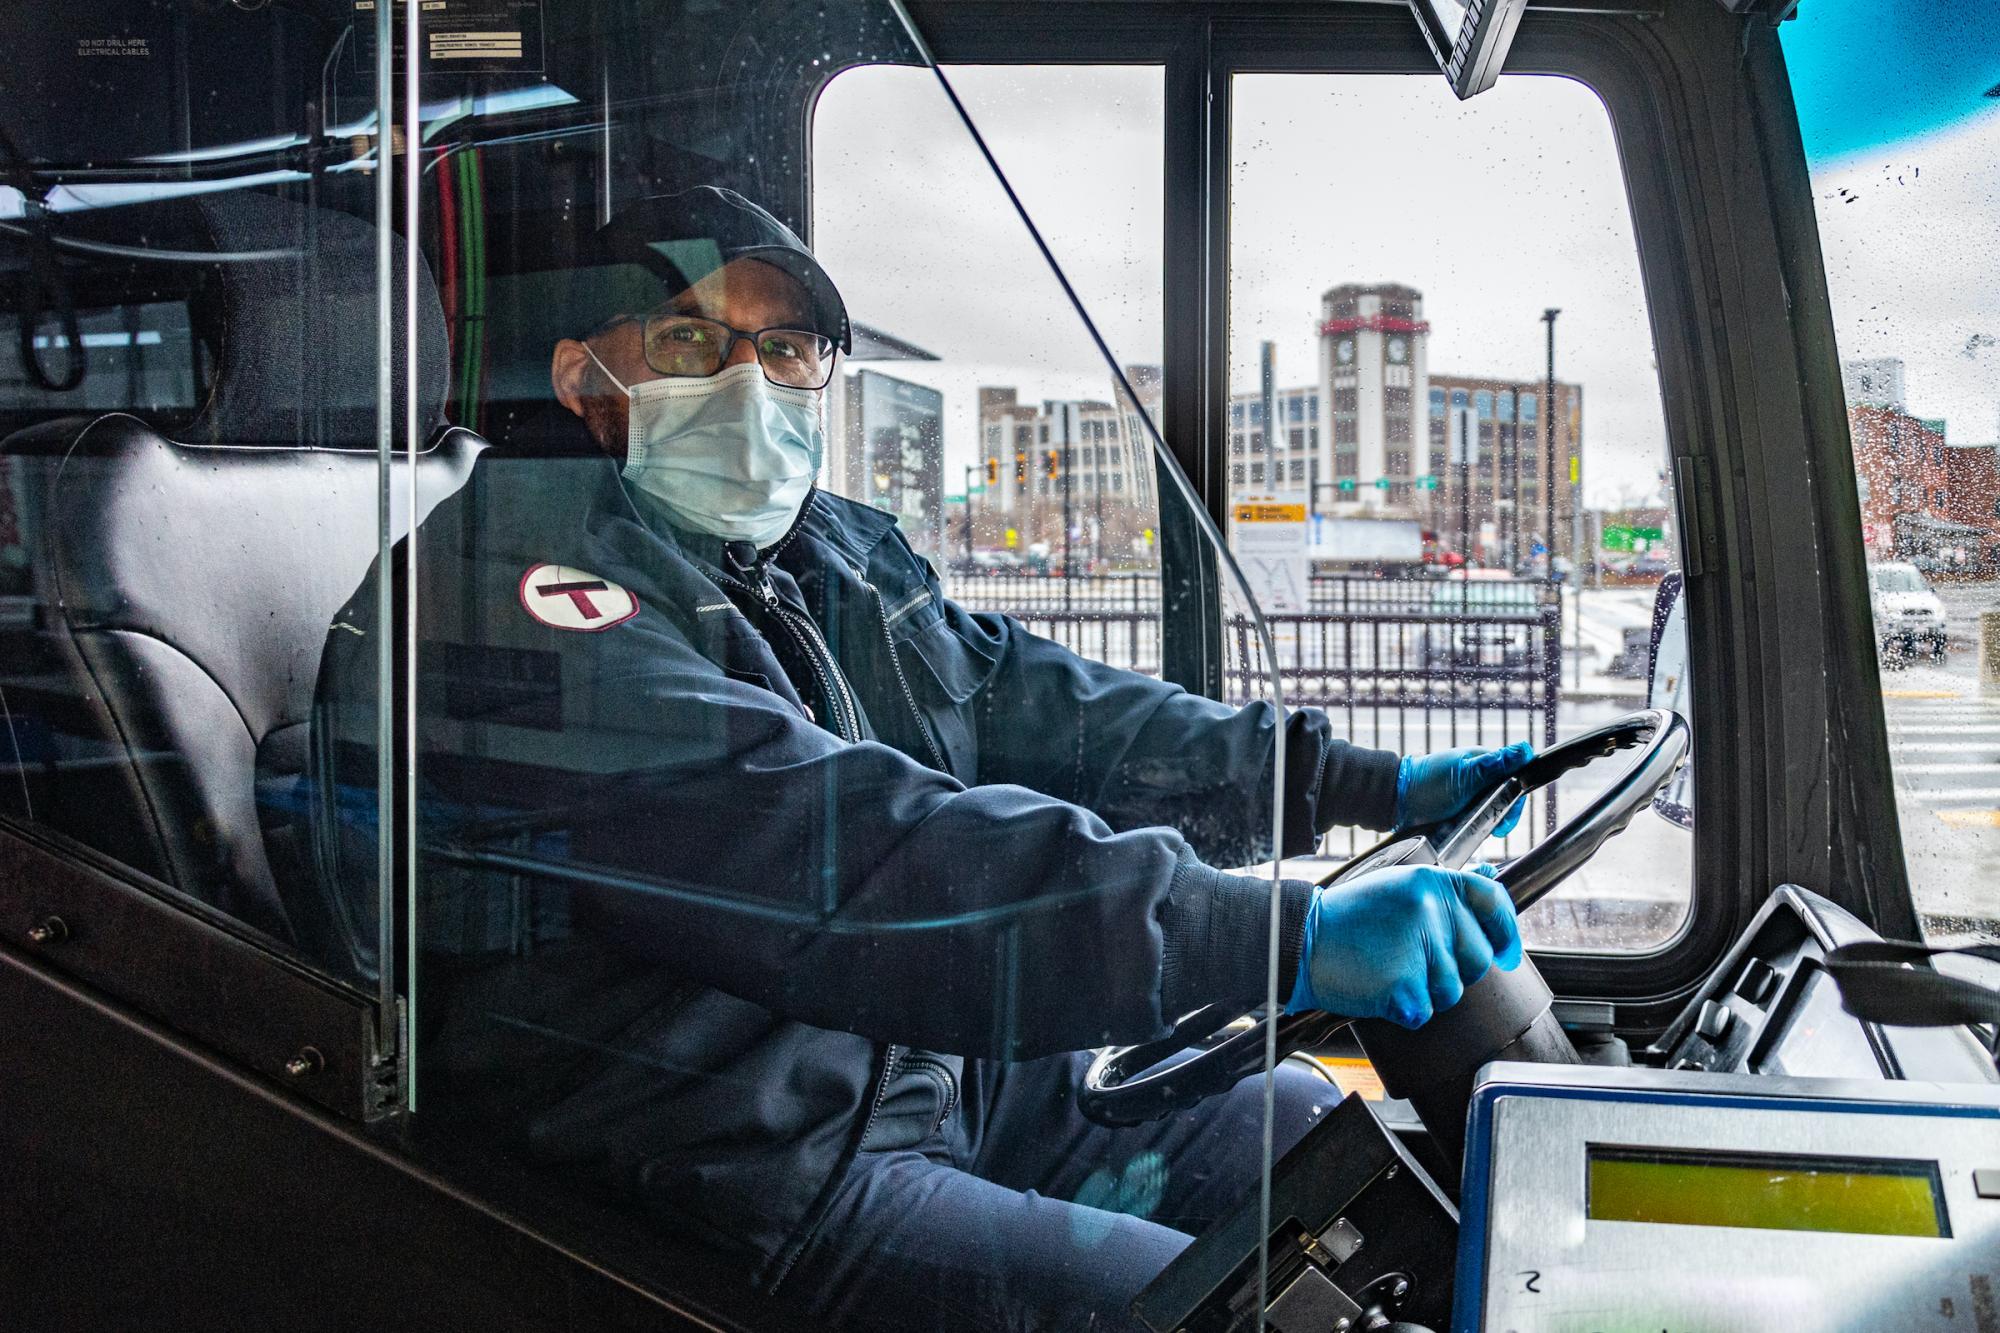 A bus driver wearing a face mask and a jacket with an MBTA "T" logo on his arm sits behind the wheel of a bus.